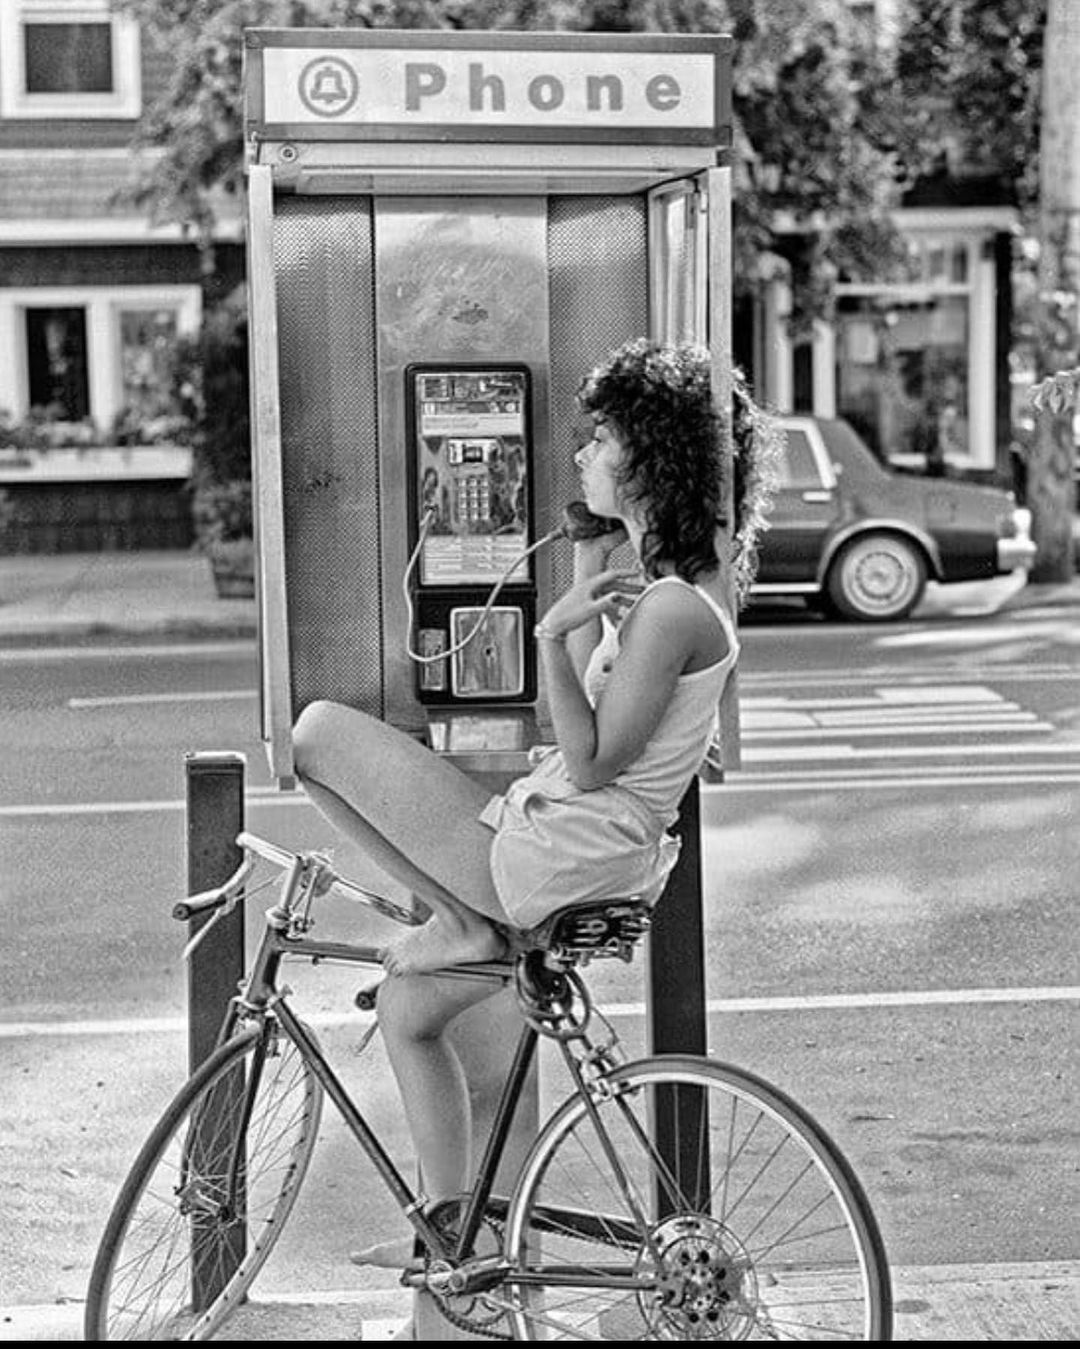 Diane on the pay phone. 1980's. City Island. The Bronx, New York. Photo by Ron Terner.jpg